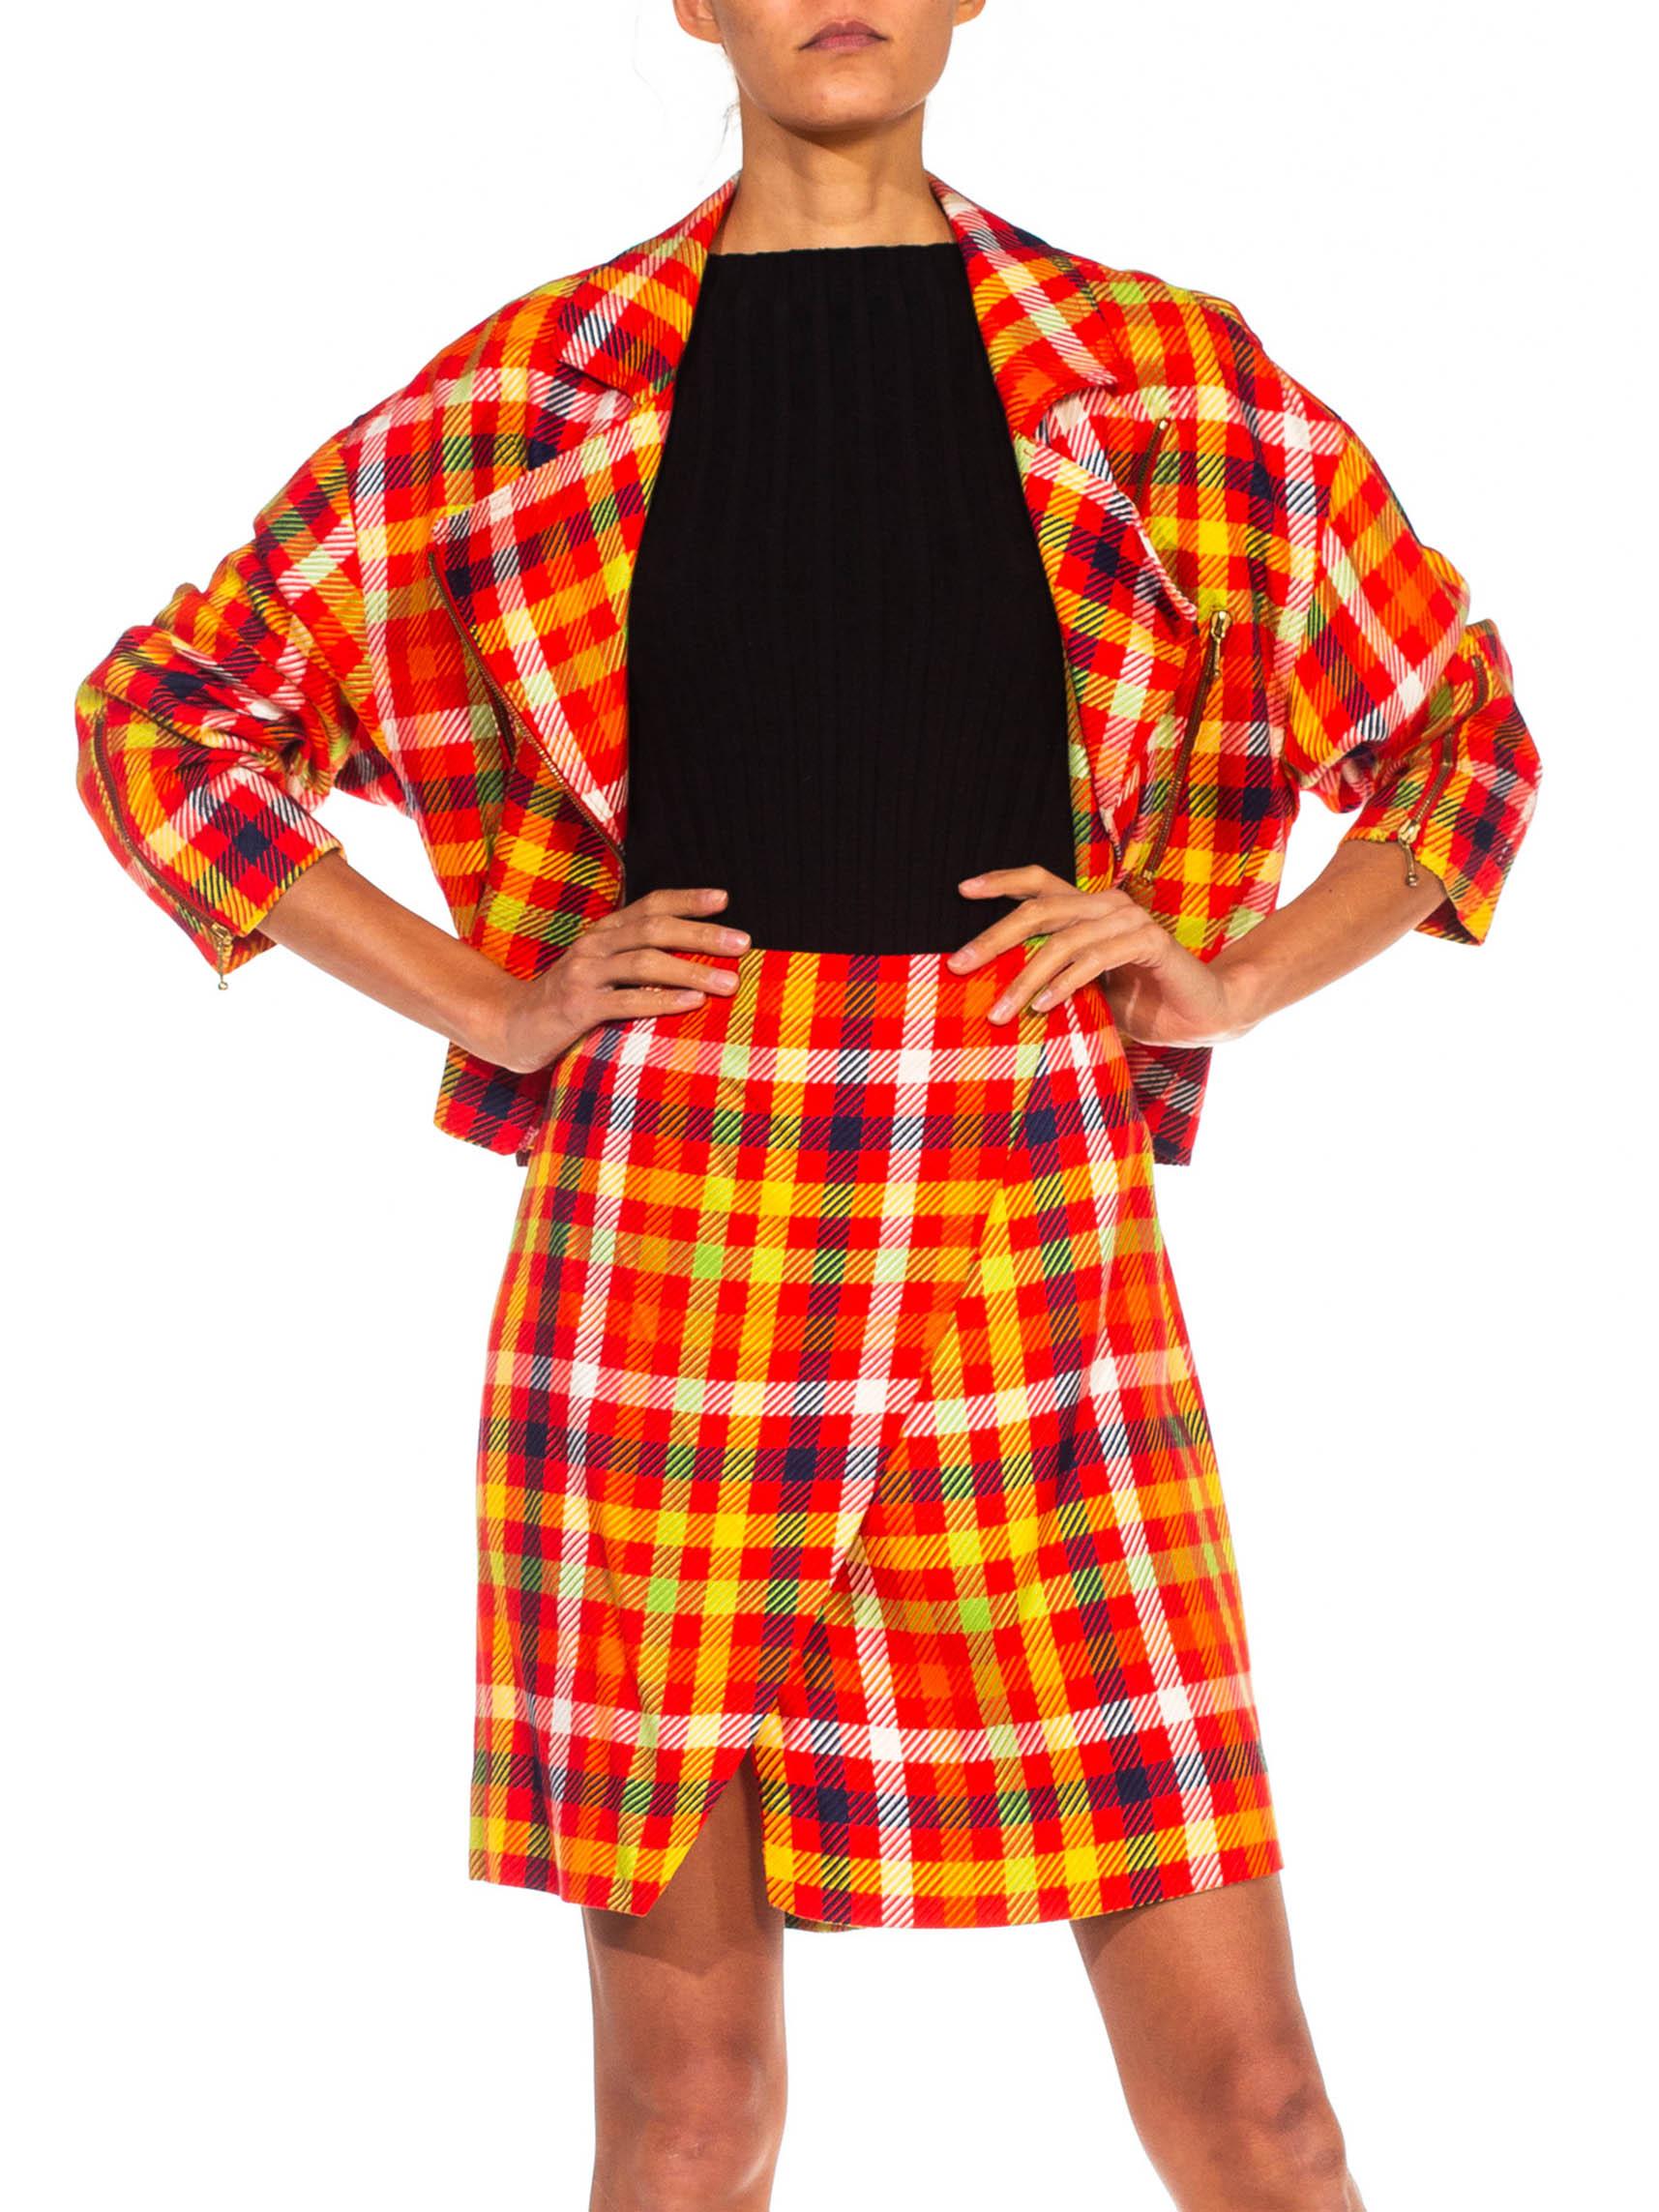 Women's 1990S EMANUEL UNGARO Red & Yellow Silk Blend Plaid Clueless Skirt Suit For Sale